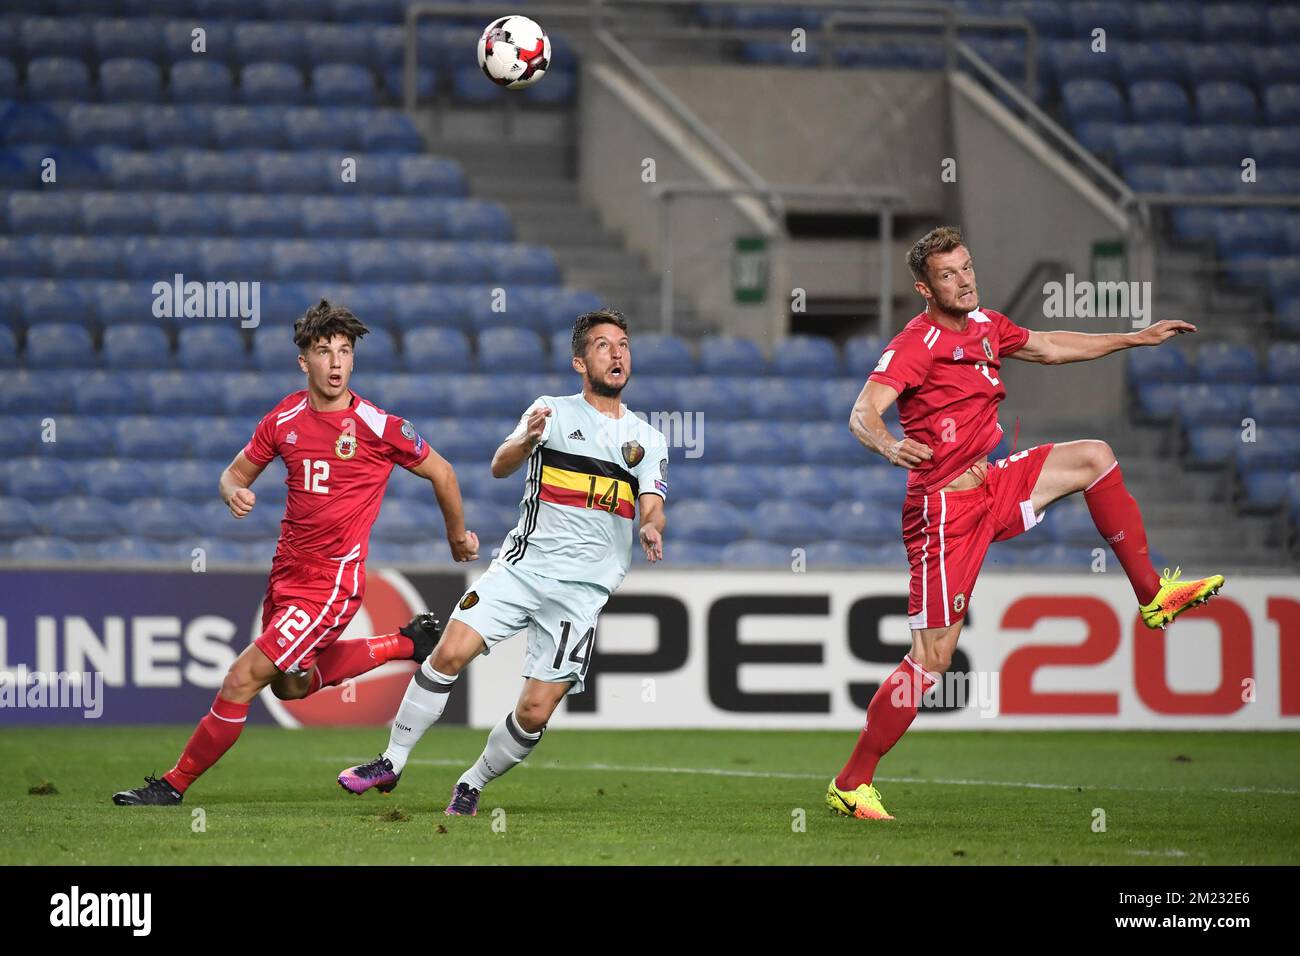 Gibraltar's Jayce Mascarenhas-Olivero, Belgium's Dries Mertens and Gibraltar's Scott Wiseman fight for the ball during a World Cup 2018 qualification game between Belgian national soccer team Red Devils and Gibraltar, Monday 10 October 2016 in Almancil, Portugal. BELGA PHOTO DIRK WAEM Stock Photo